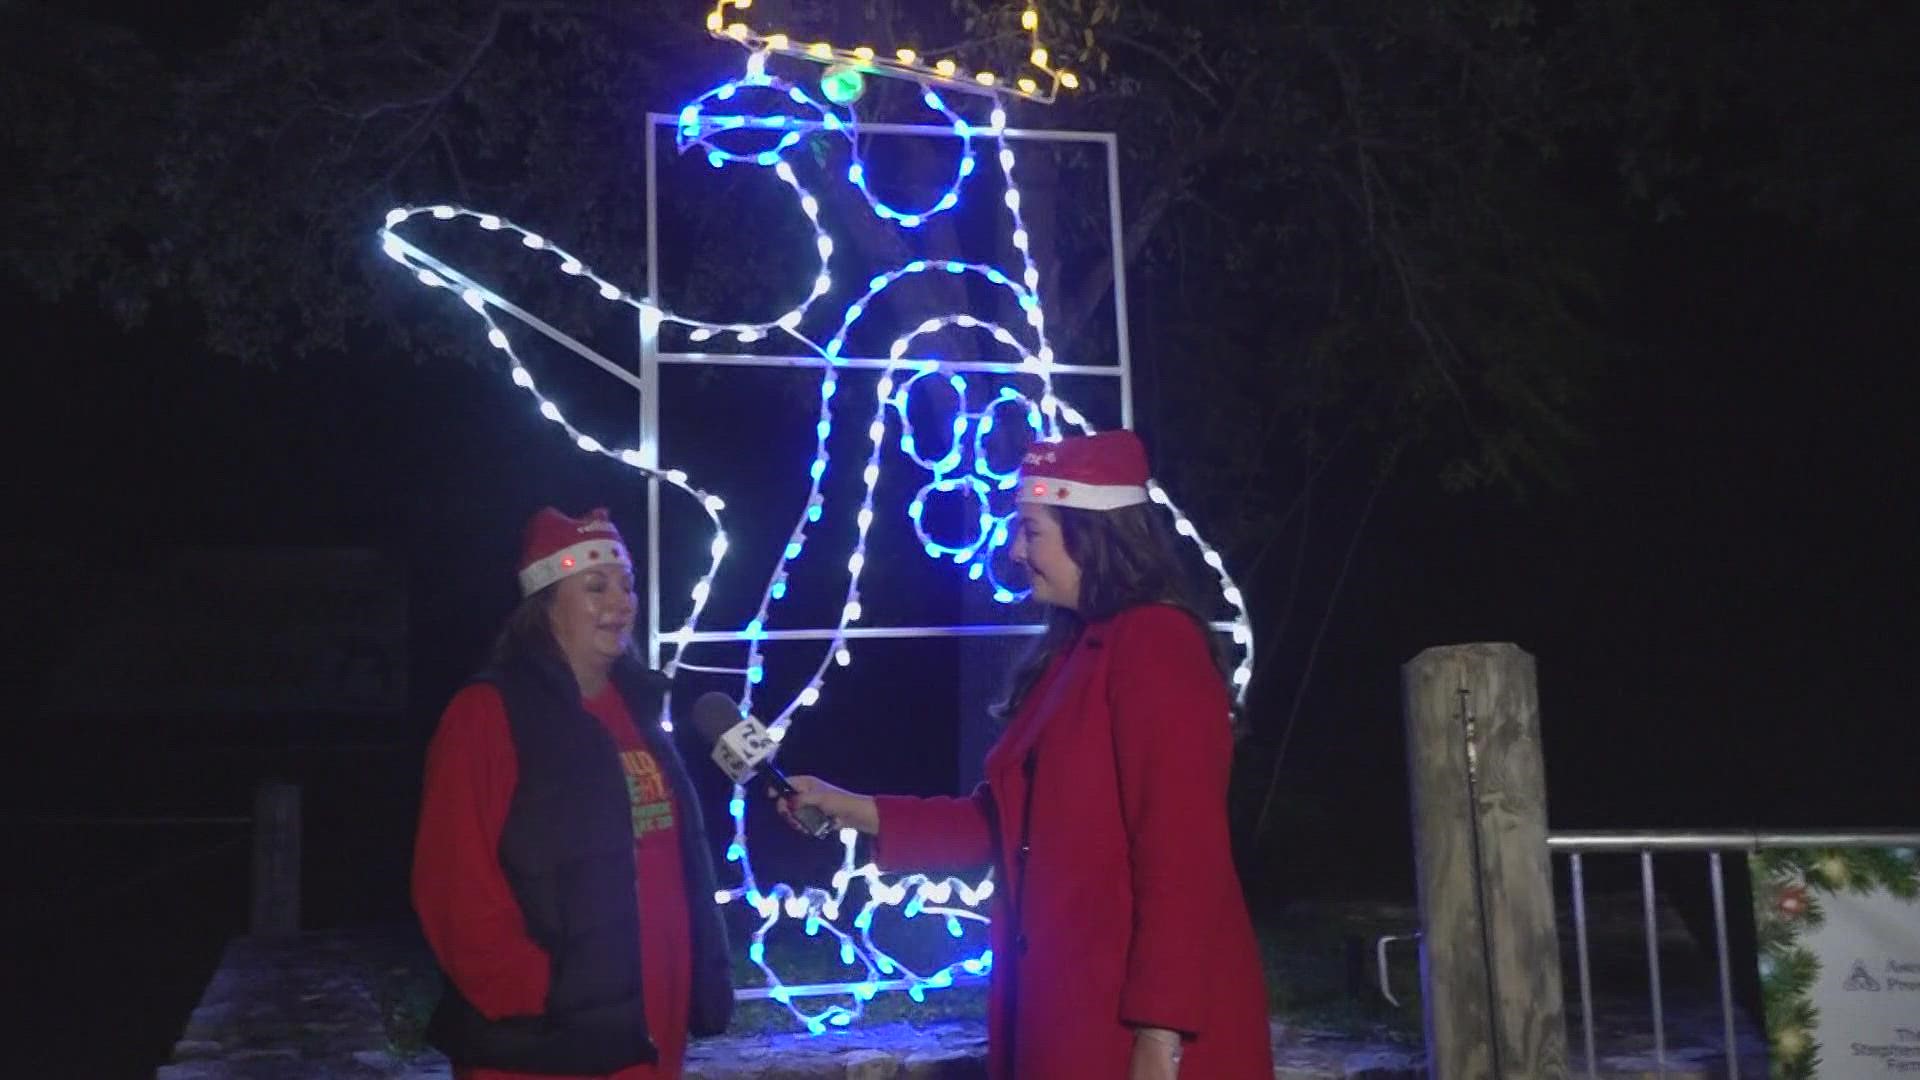 Texas Today's Meredith Haas takes a visit to Cameron Park Zoo to find out more about it's Wild Lights.